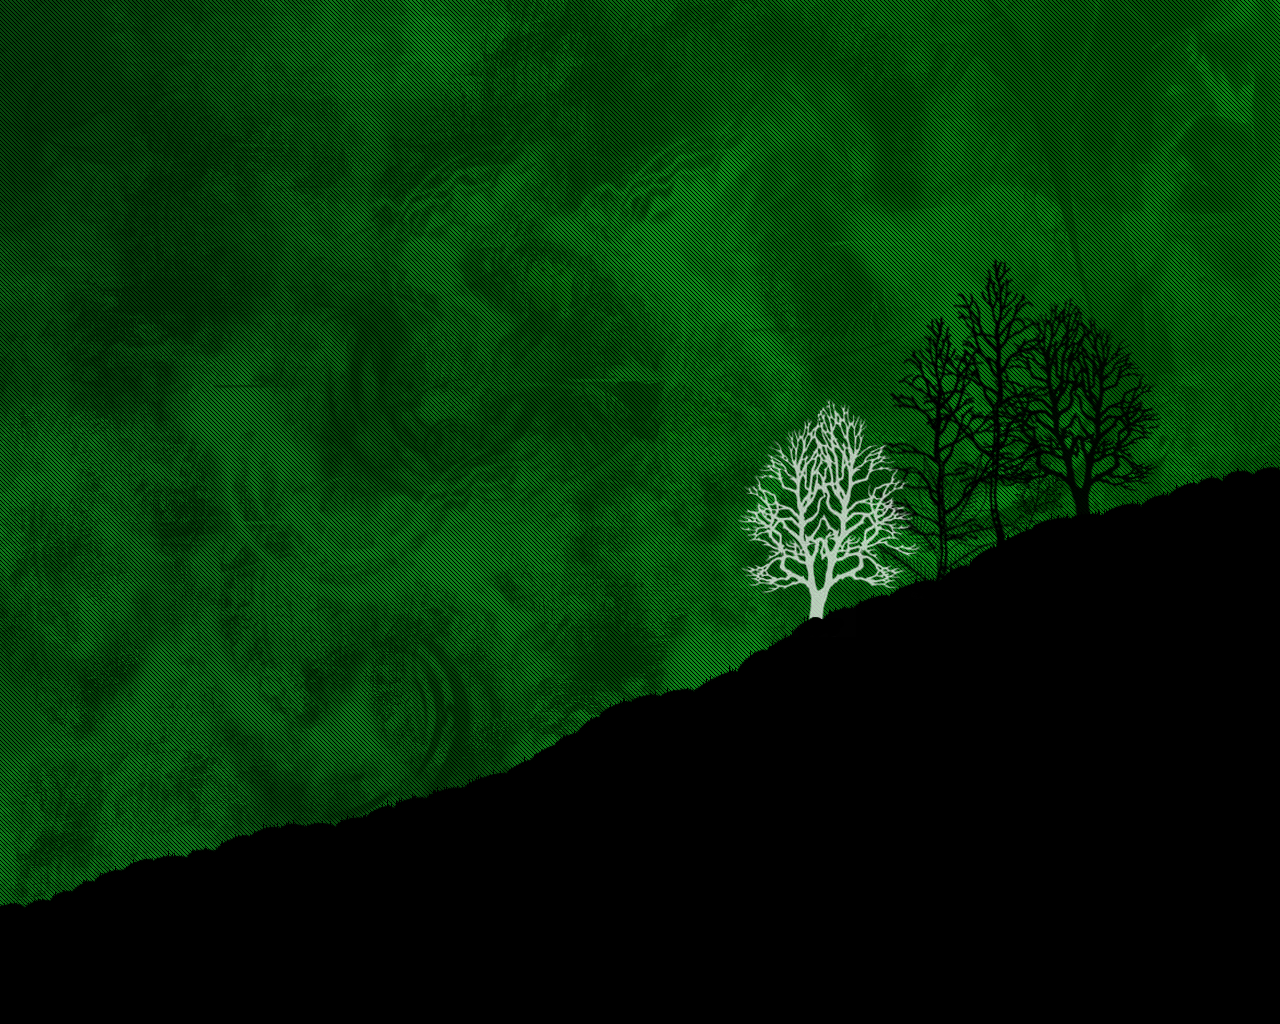 Black And Neon Green Backgrounds Widescreen 2 HD Wallpapers amagico